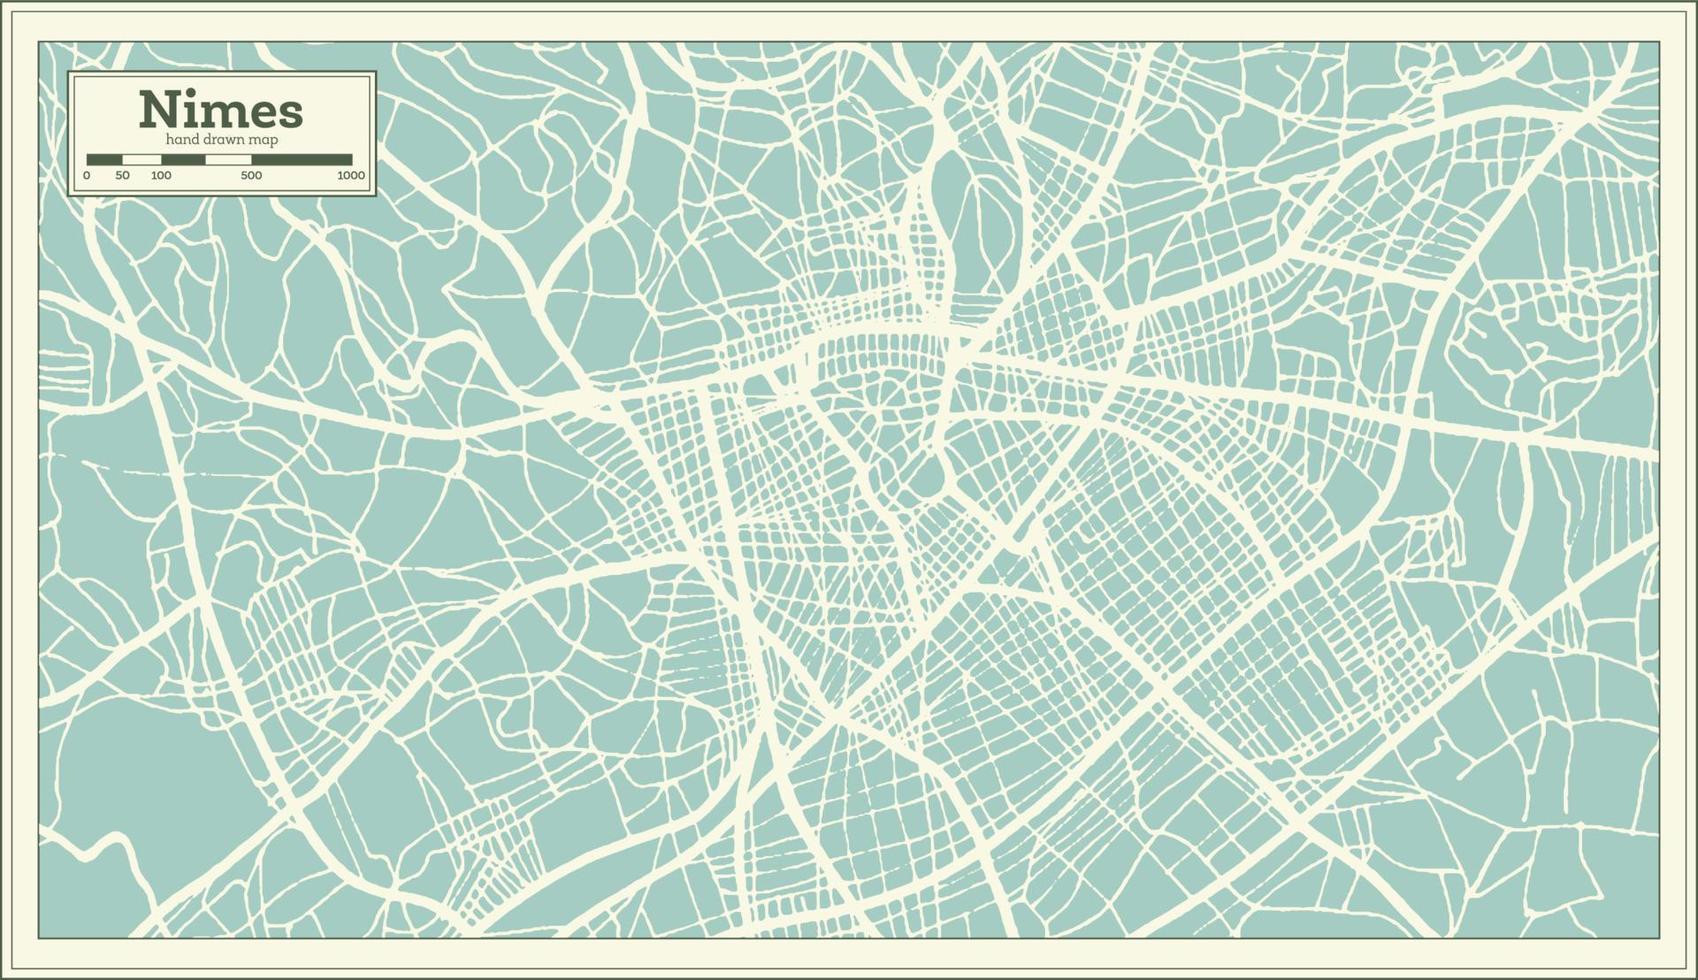 Nimes France City Map in Retro Style. Outline Map. Vector Illustration.